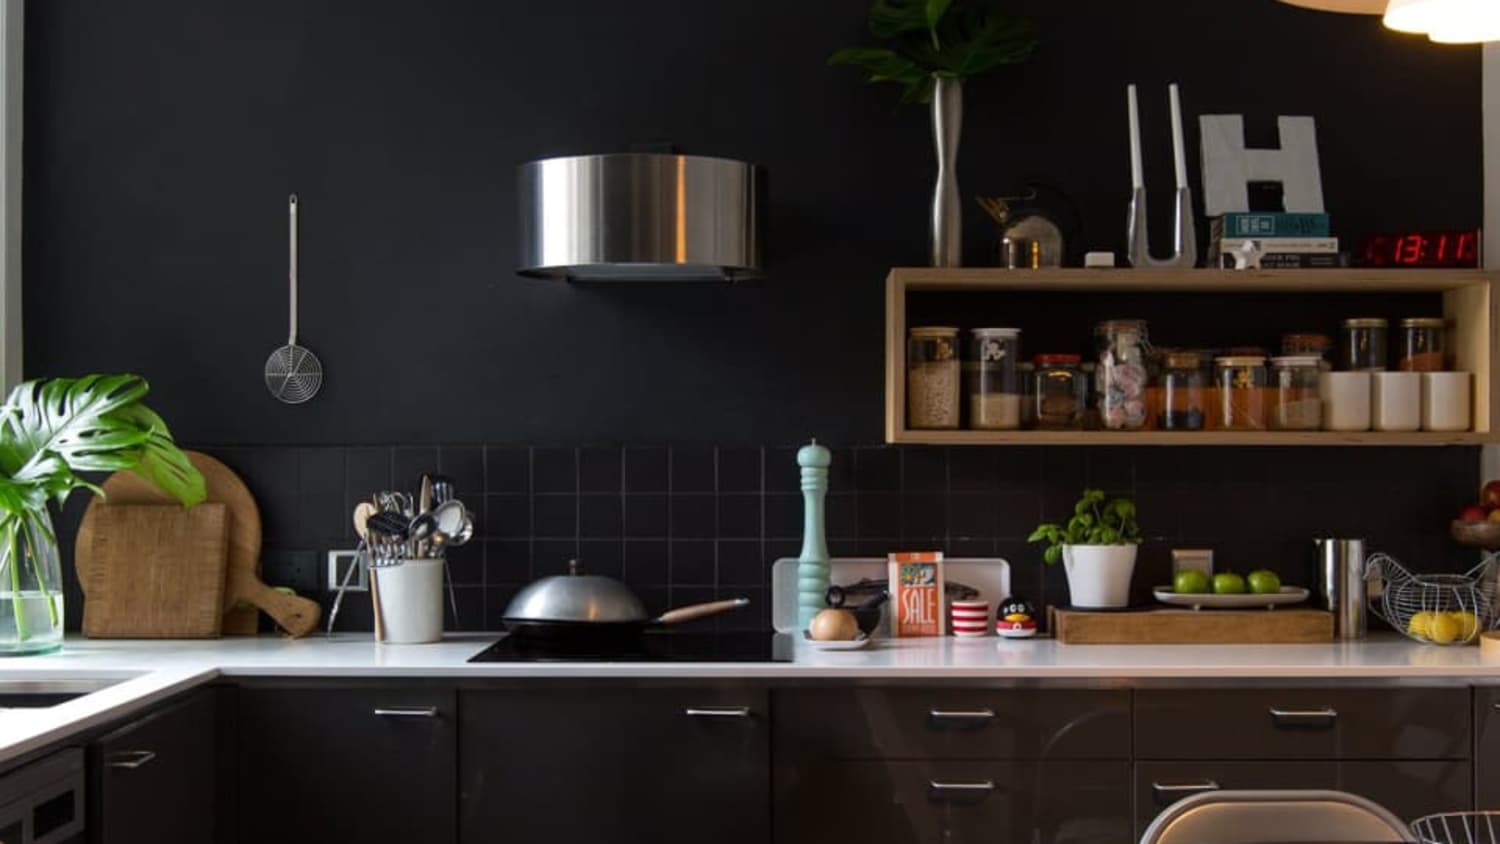 How To Lighten Dark Cabinets In Kitchen Things In The Kitchen